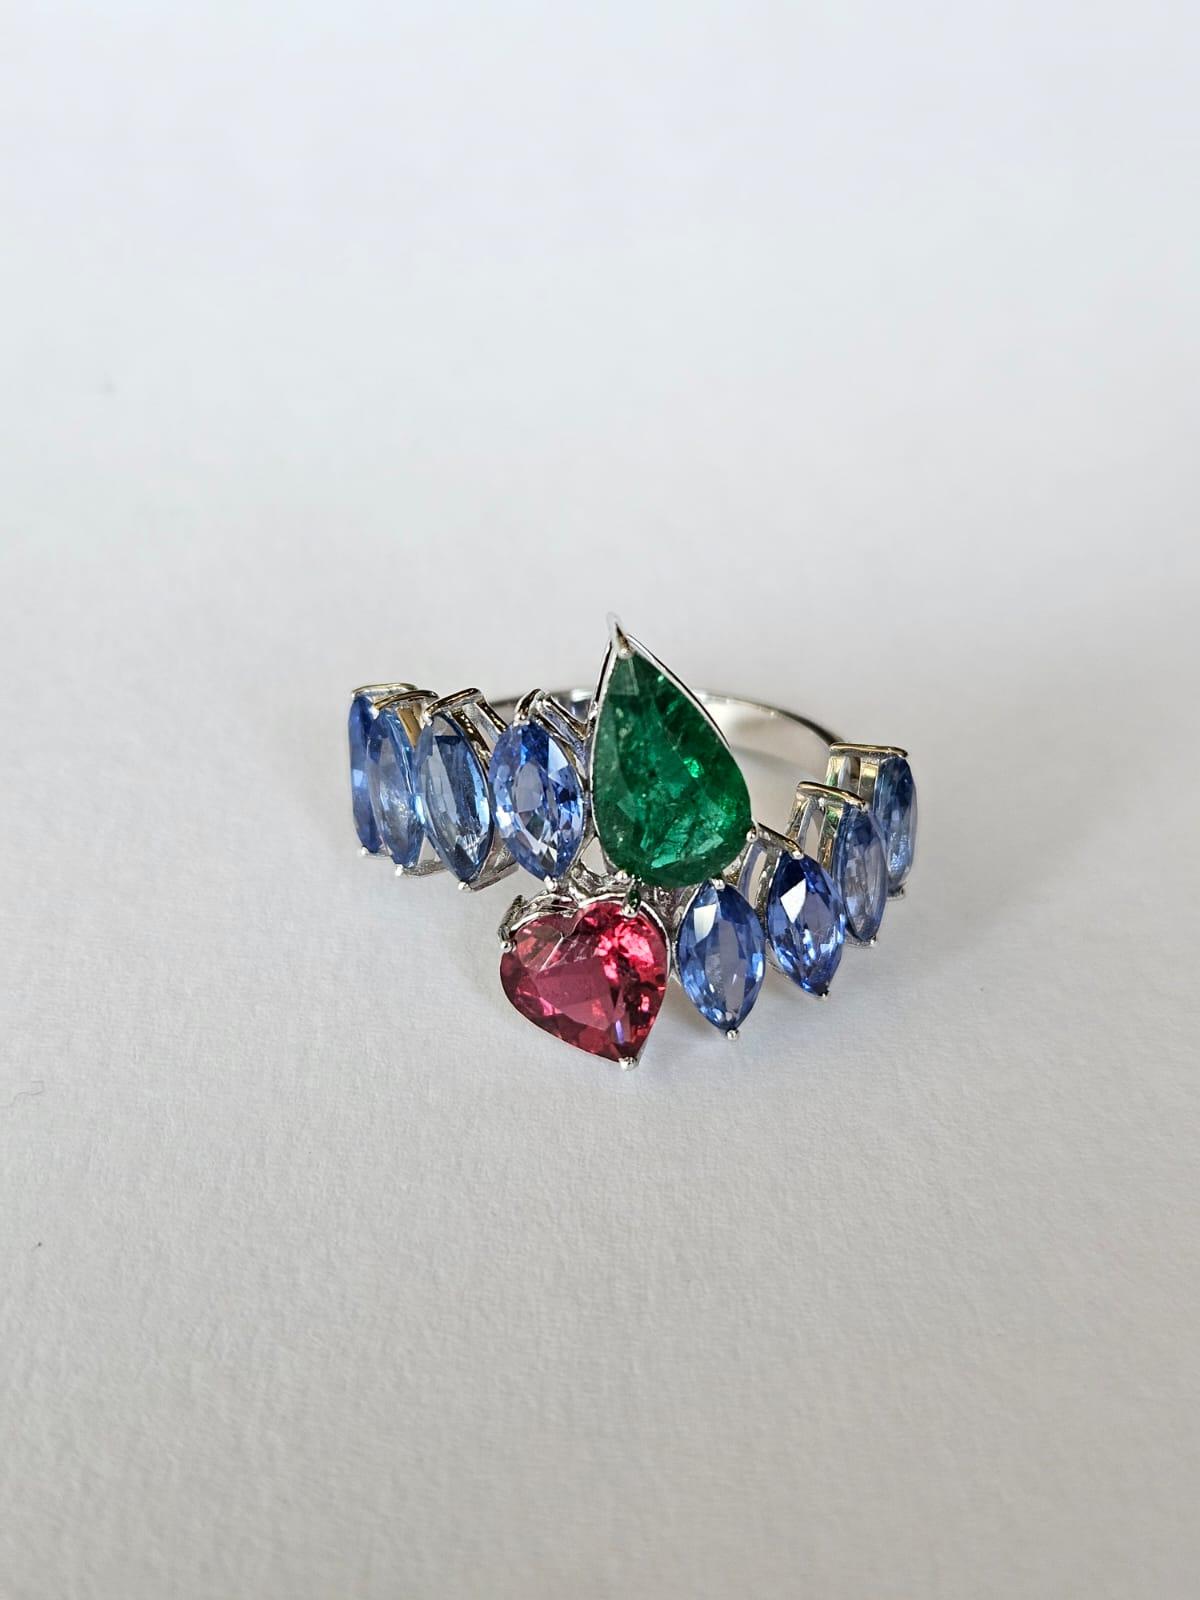 Set in 18K White Gold, 3.44 carats Blue Sapphire, Emerald & Tourmaline Band Ring For Sale 3